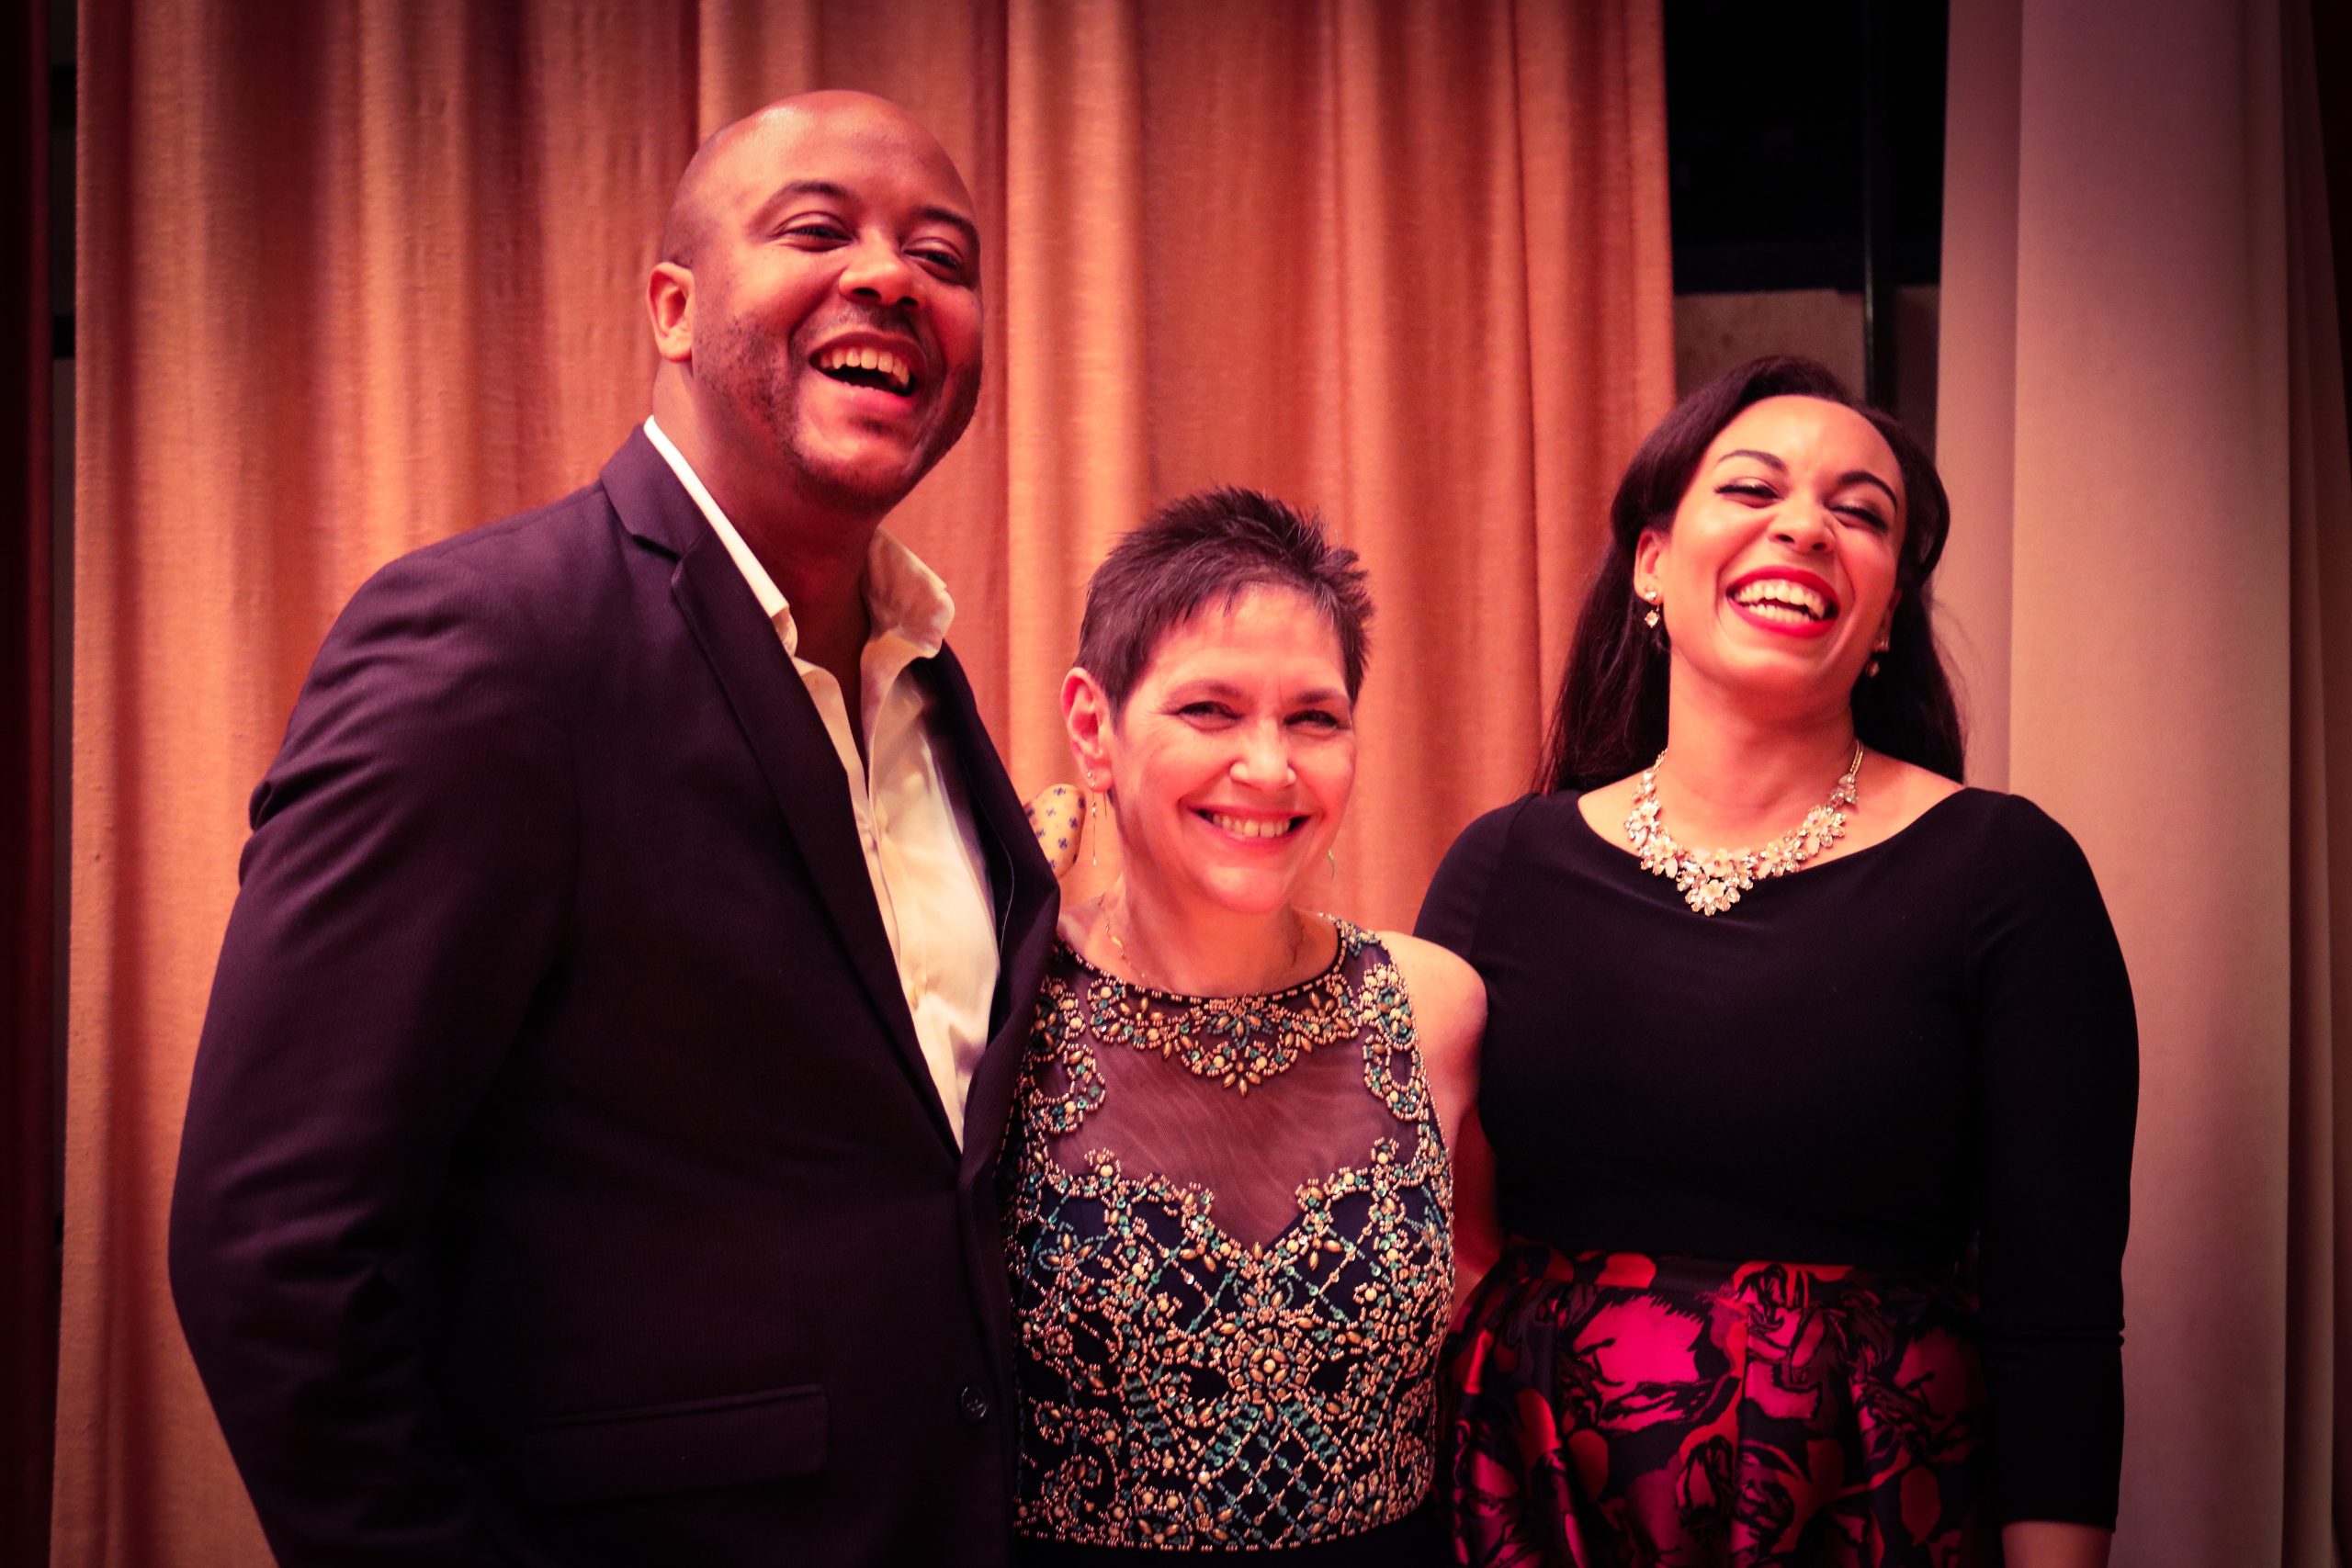 Jorrell Williams, Julie Figueras, and Christine Lyons at the 12th Annual Rochester International Vocal Competition